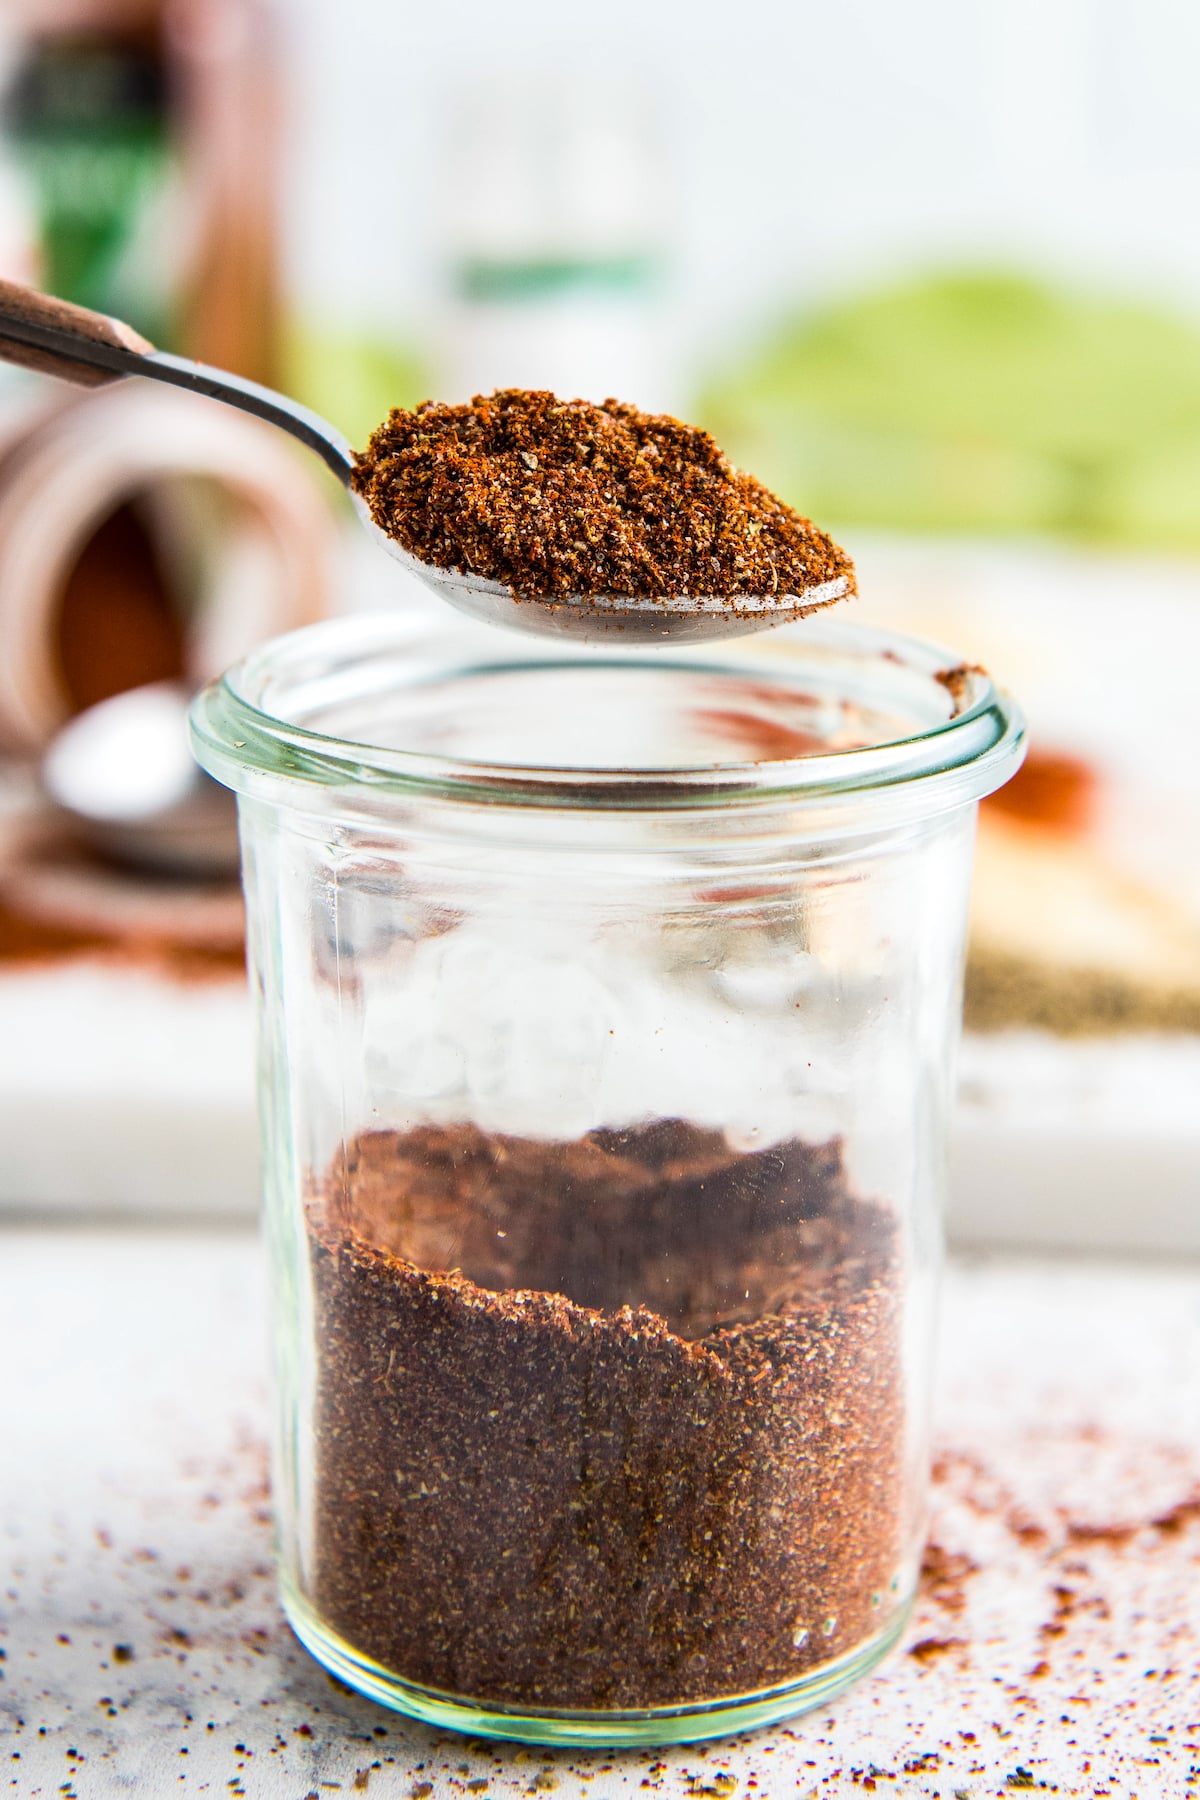 Chili seasoning on a spoon being scooped out of the glass jar.